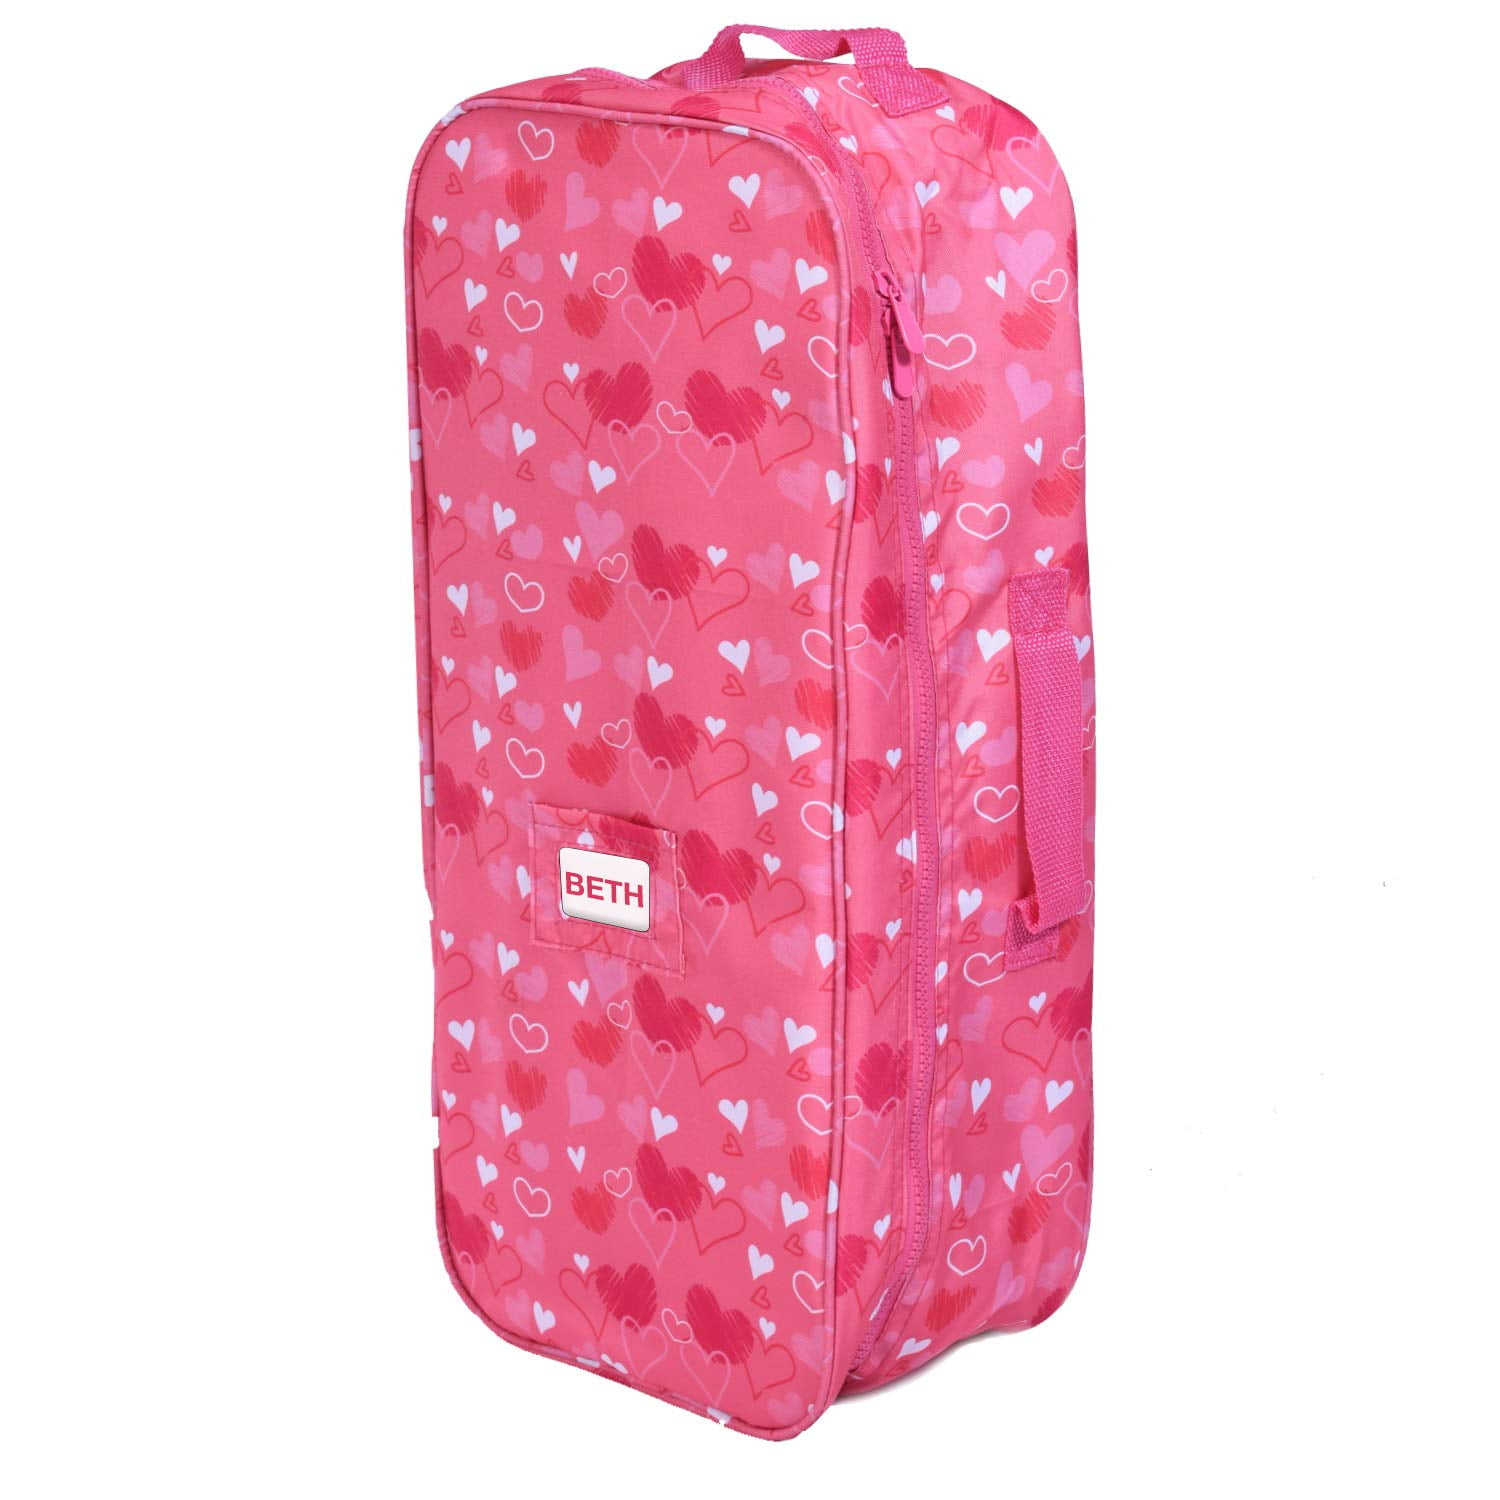 Dolly Molly  Dolls Toy Travel Cot And Carry bag Christmas Gift Pink Storage Bag 